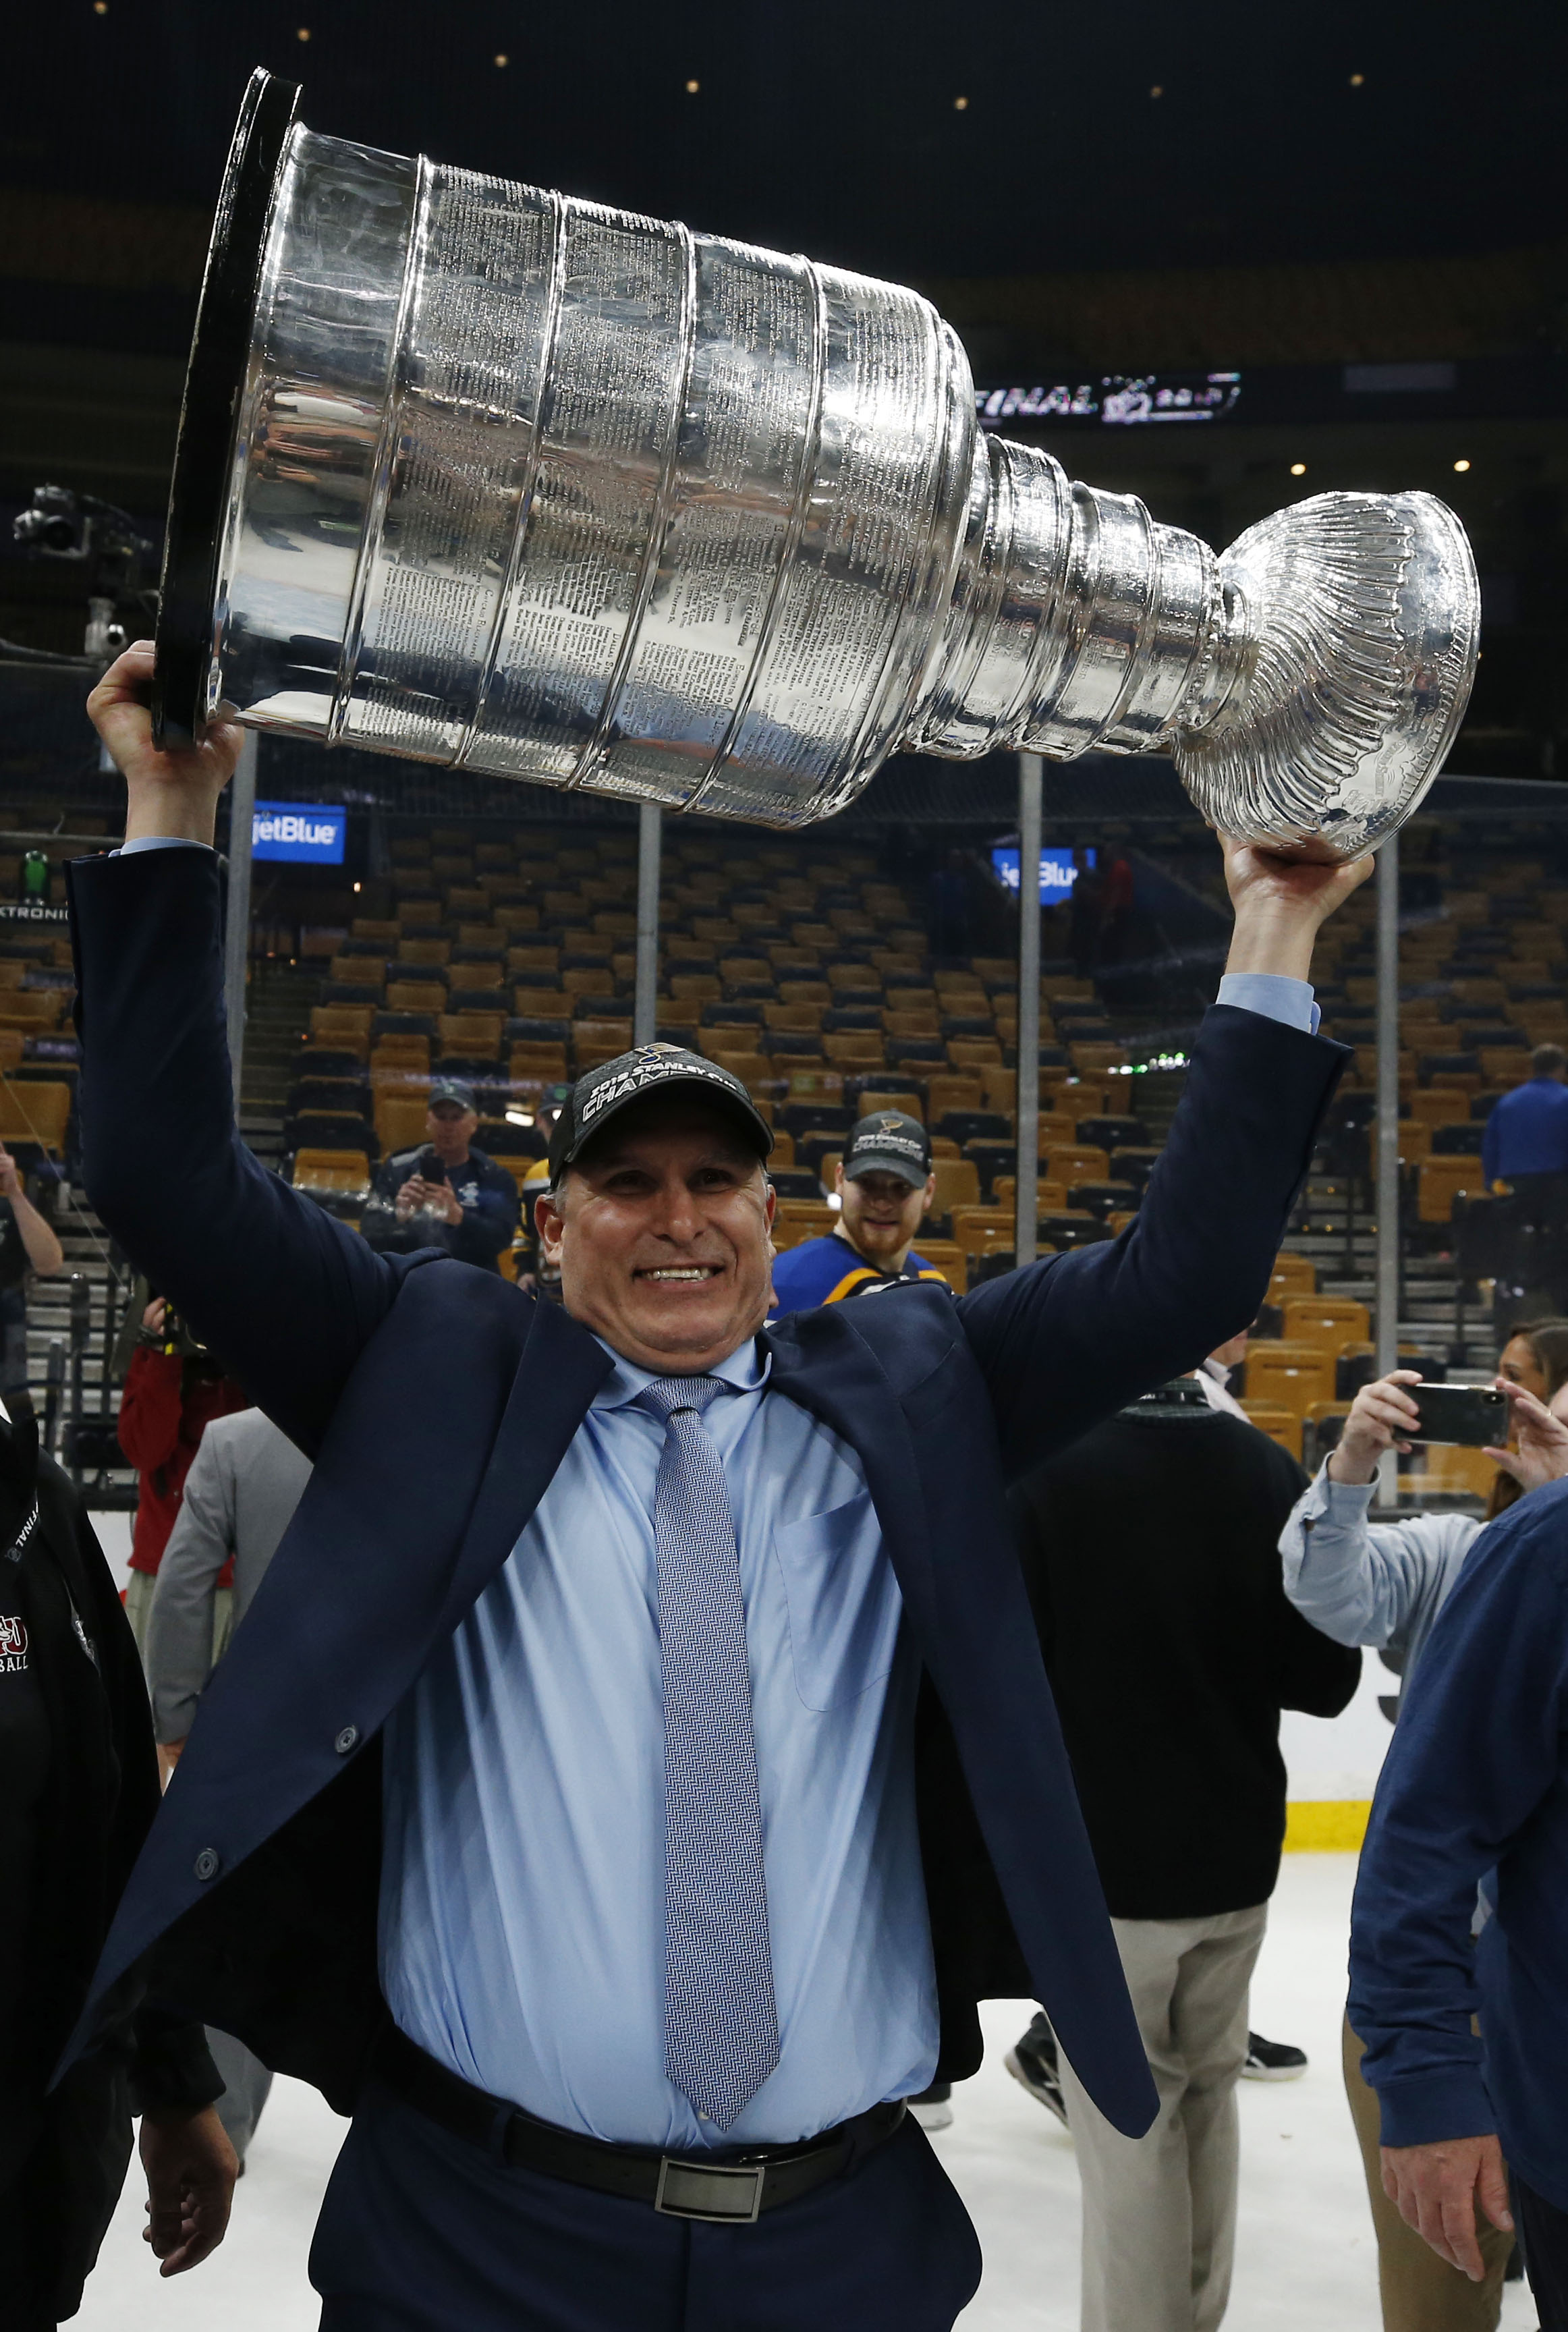 Craig Berube, Blues Agree to 3-Year Contract as HC After 2019